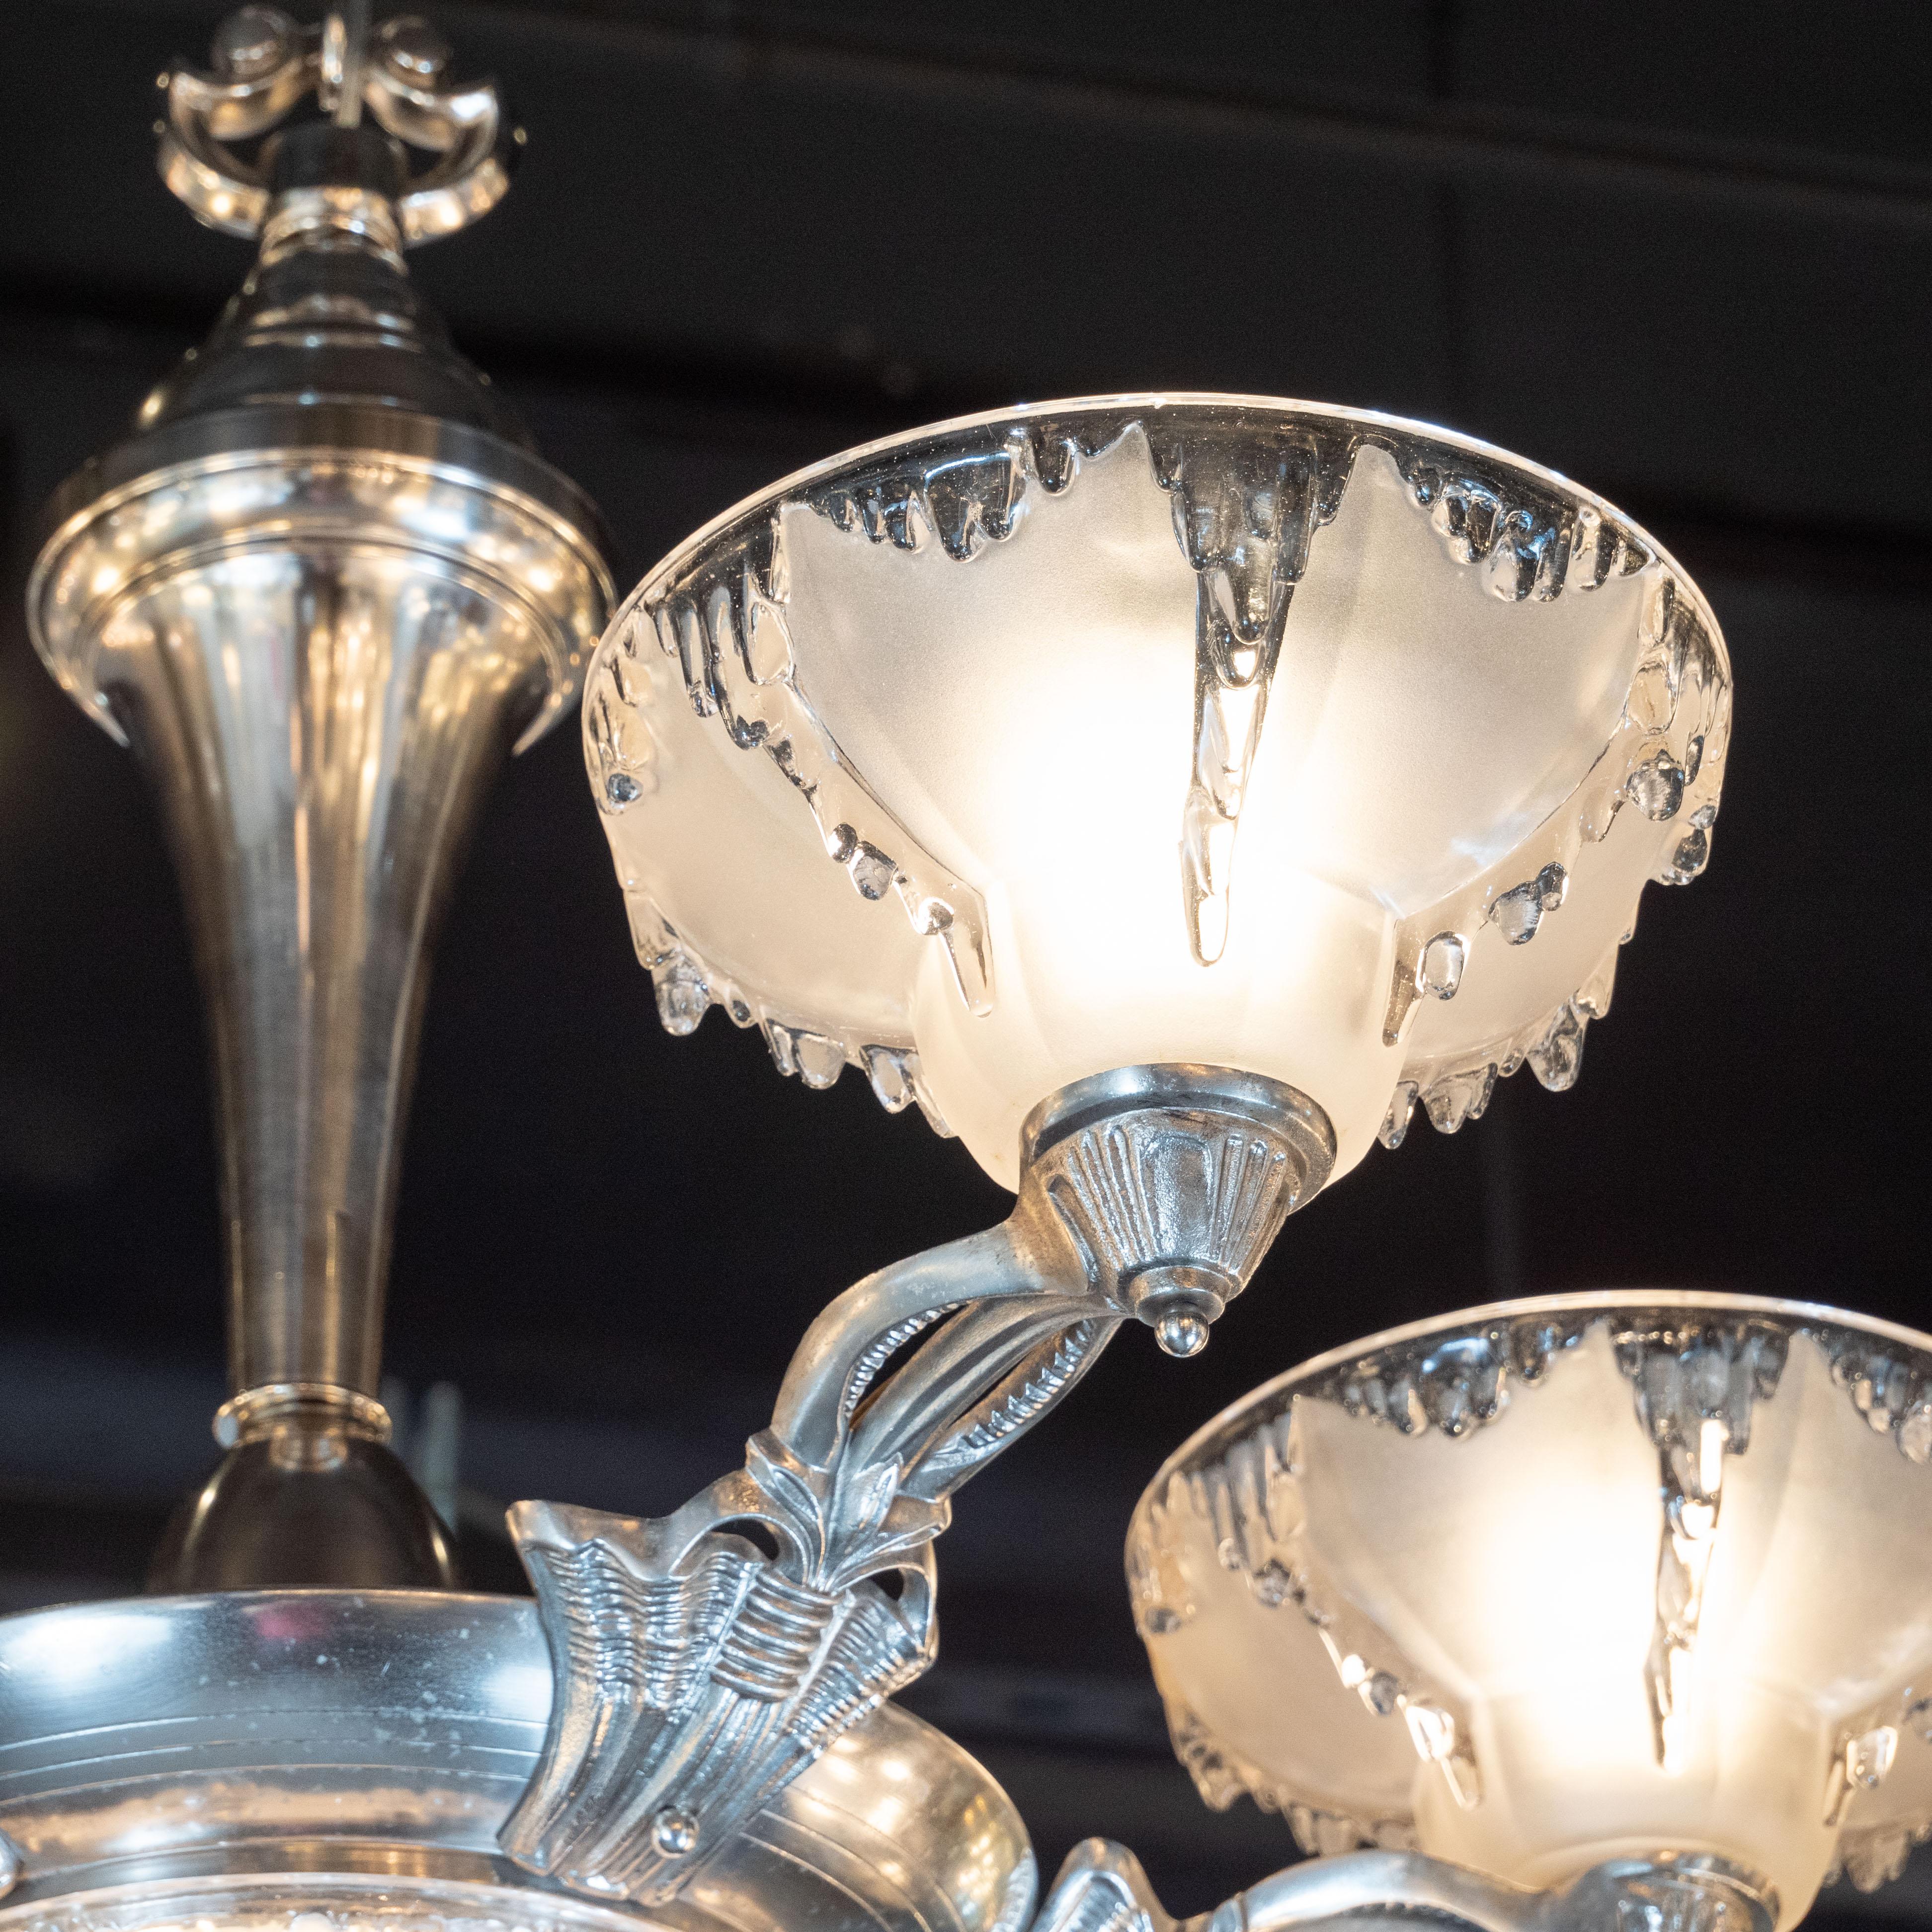 Mid-20th Century Art Deco Frosted Glass Chandelier with Silvered Bronze Fittings, Ezan & Petitot